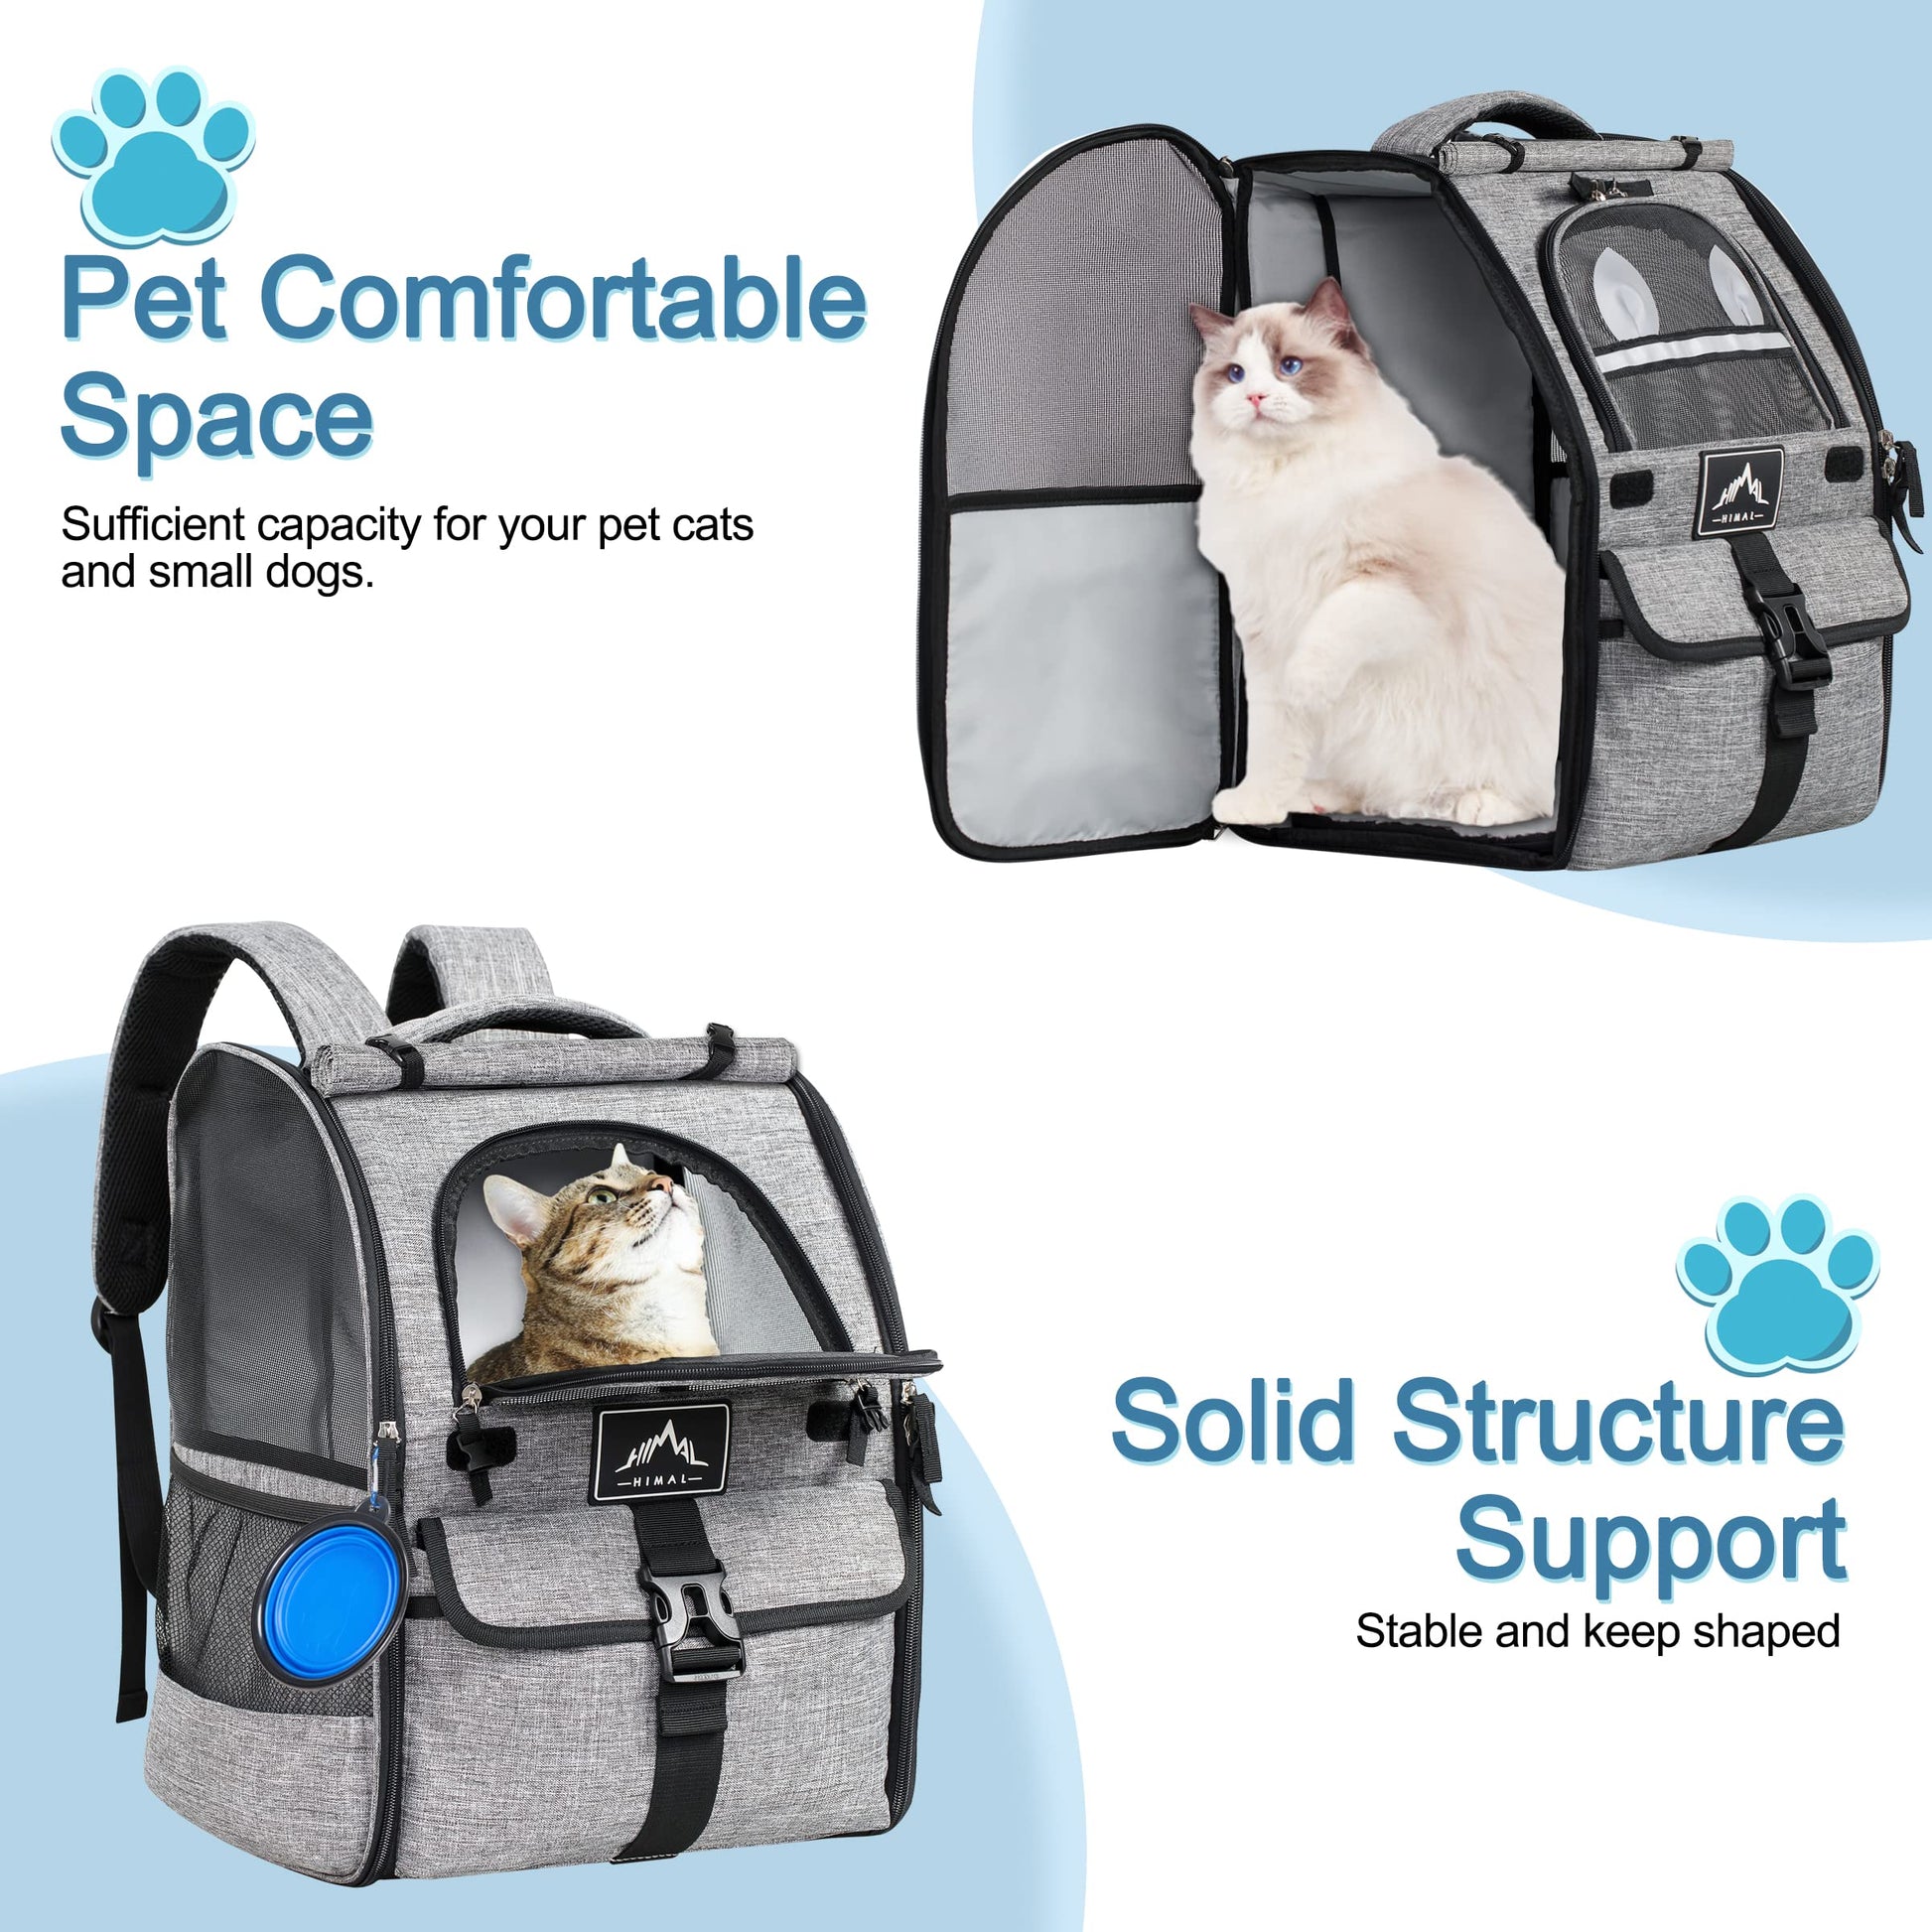 GoHimal Pet Carrier Backpack for Dogs and Cats,Puppies,Ventilated Design Breathable Dog Carrier Backpack,Cat Bag for Hiking Travel Camping Outdoor Use